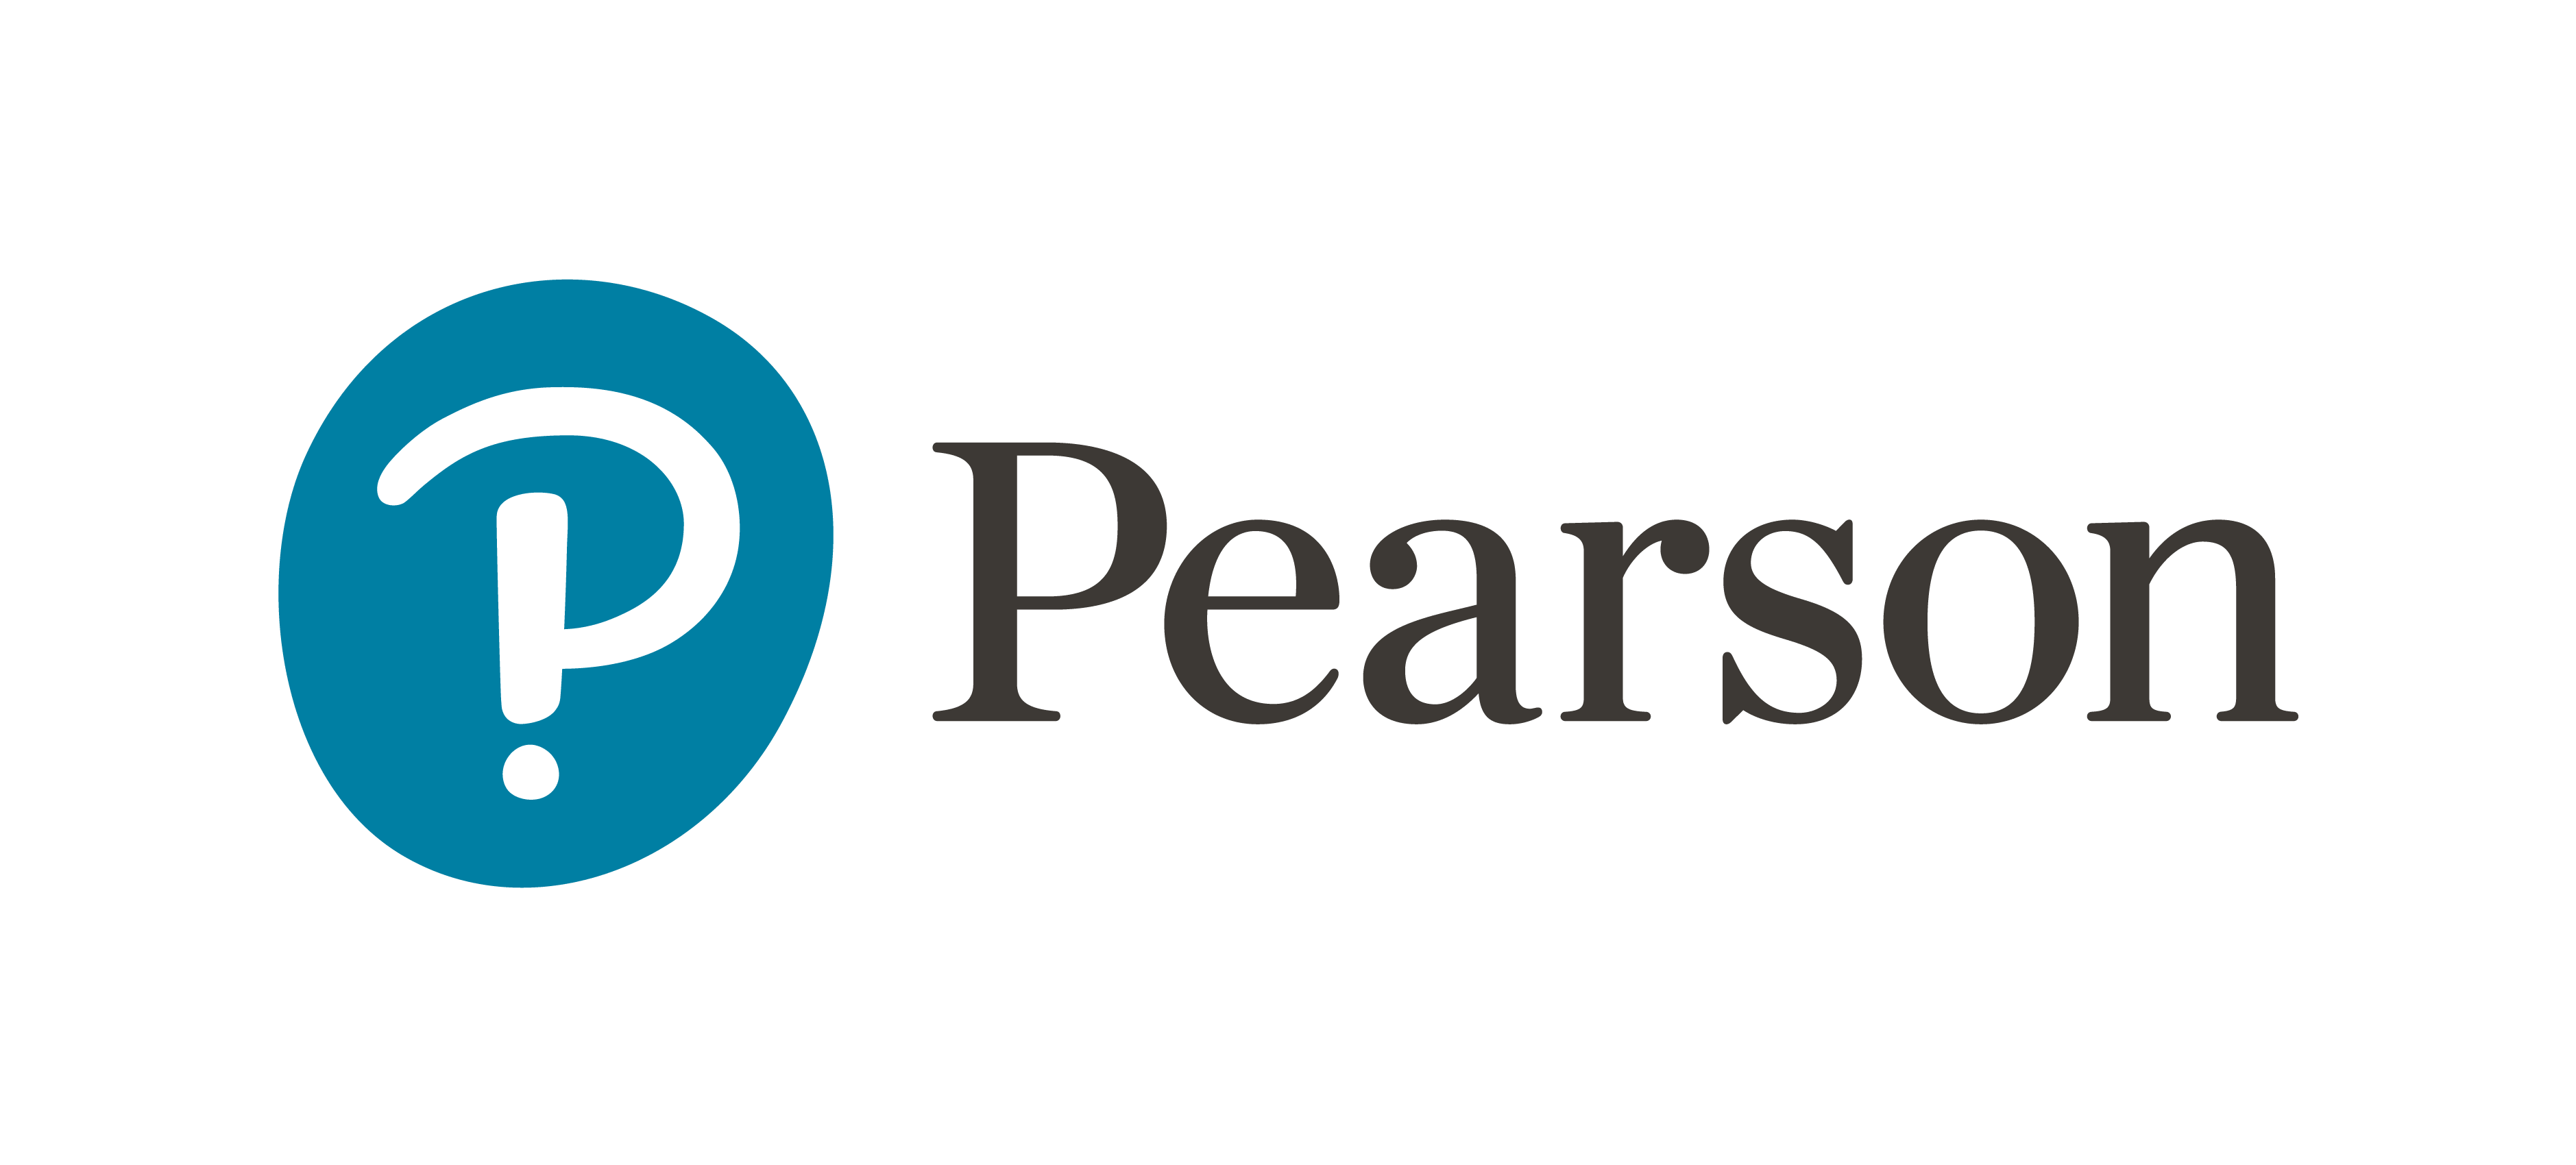 Pearson English Test Examples